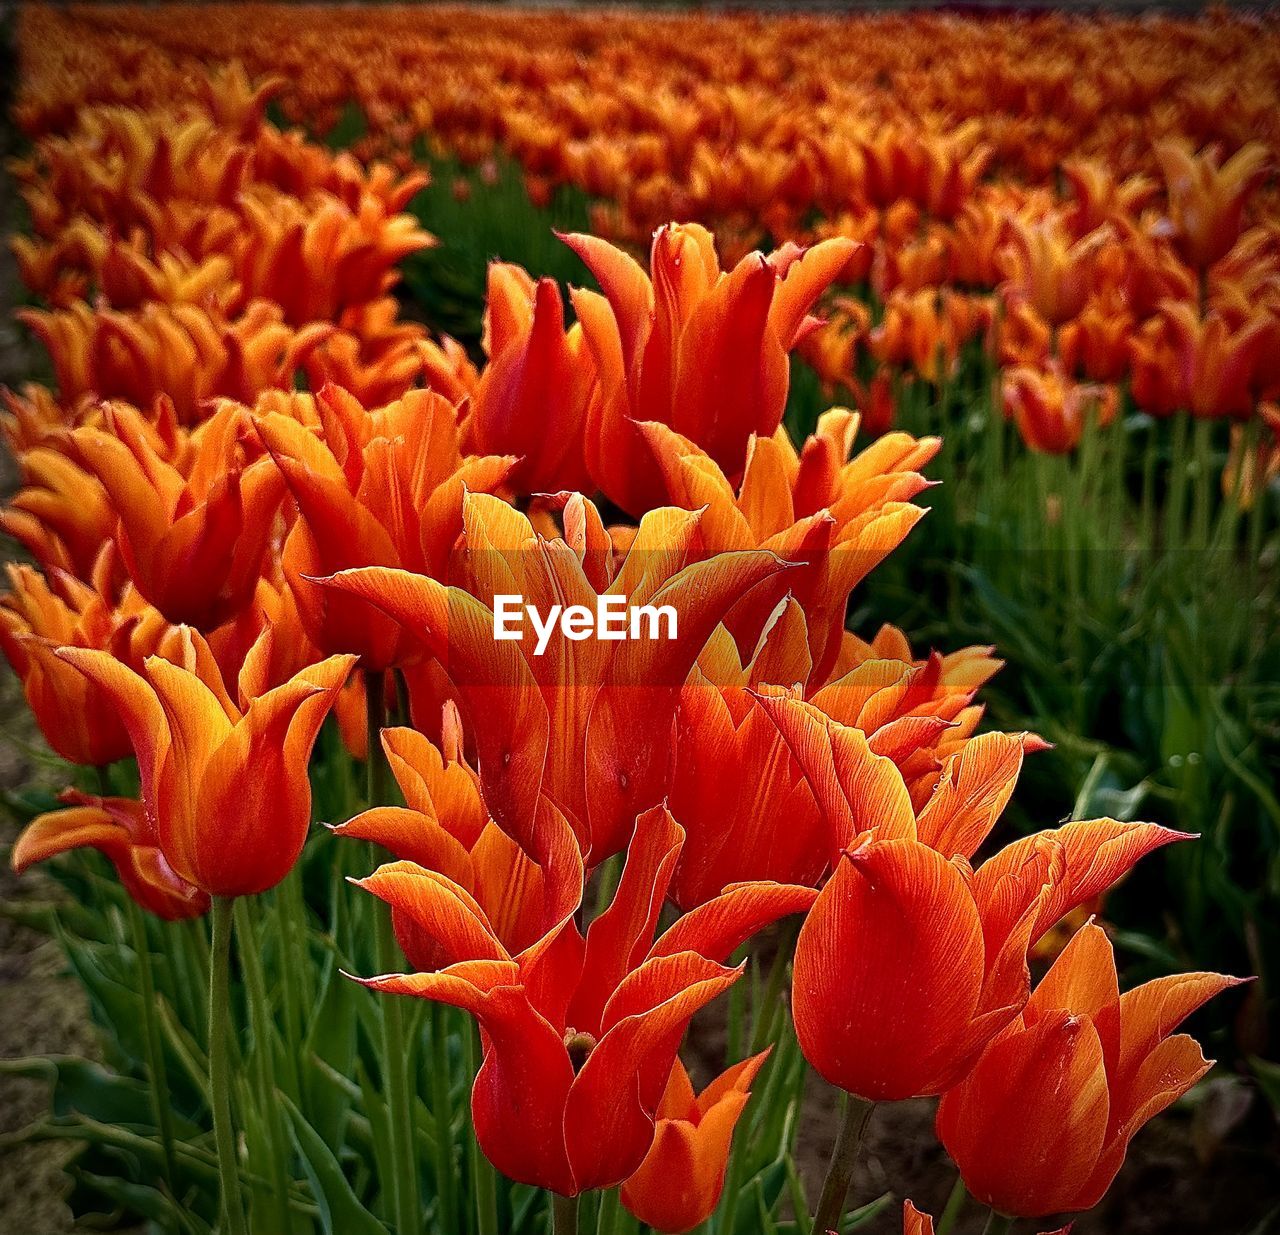 plant, flower, flowering plant, beauty in nature, freshness, growth, petal, fragility, flower head, orange color, nature, inflorescence, close-up, field, no people, land, botany, tulip, focus on foreground, day, outdoors, flowerbed, blossom, springtime, vibrant color, red